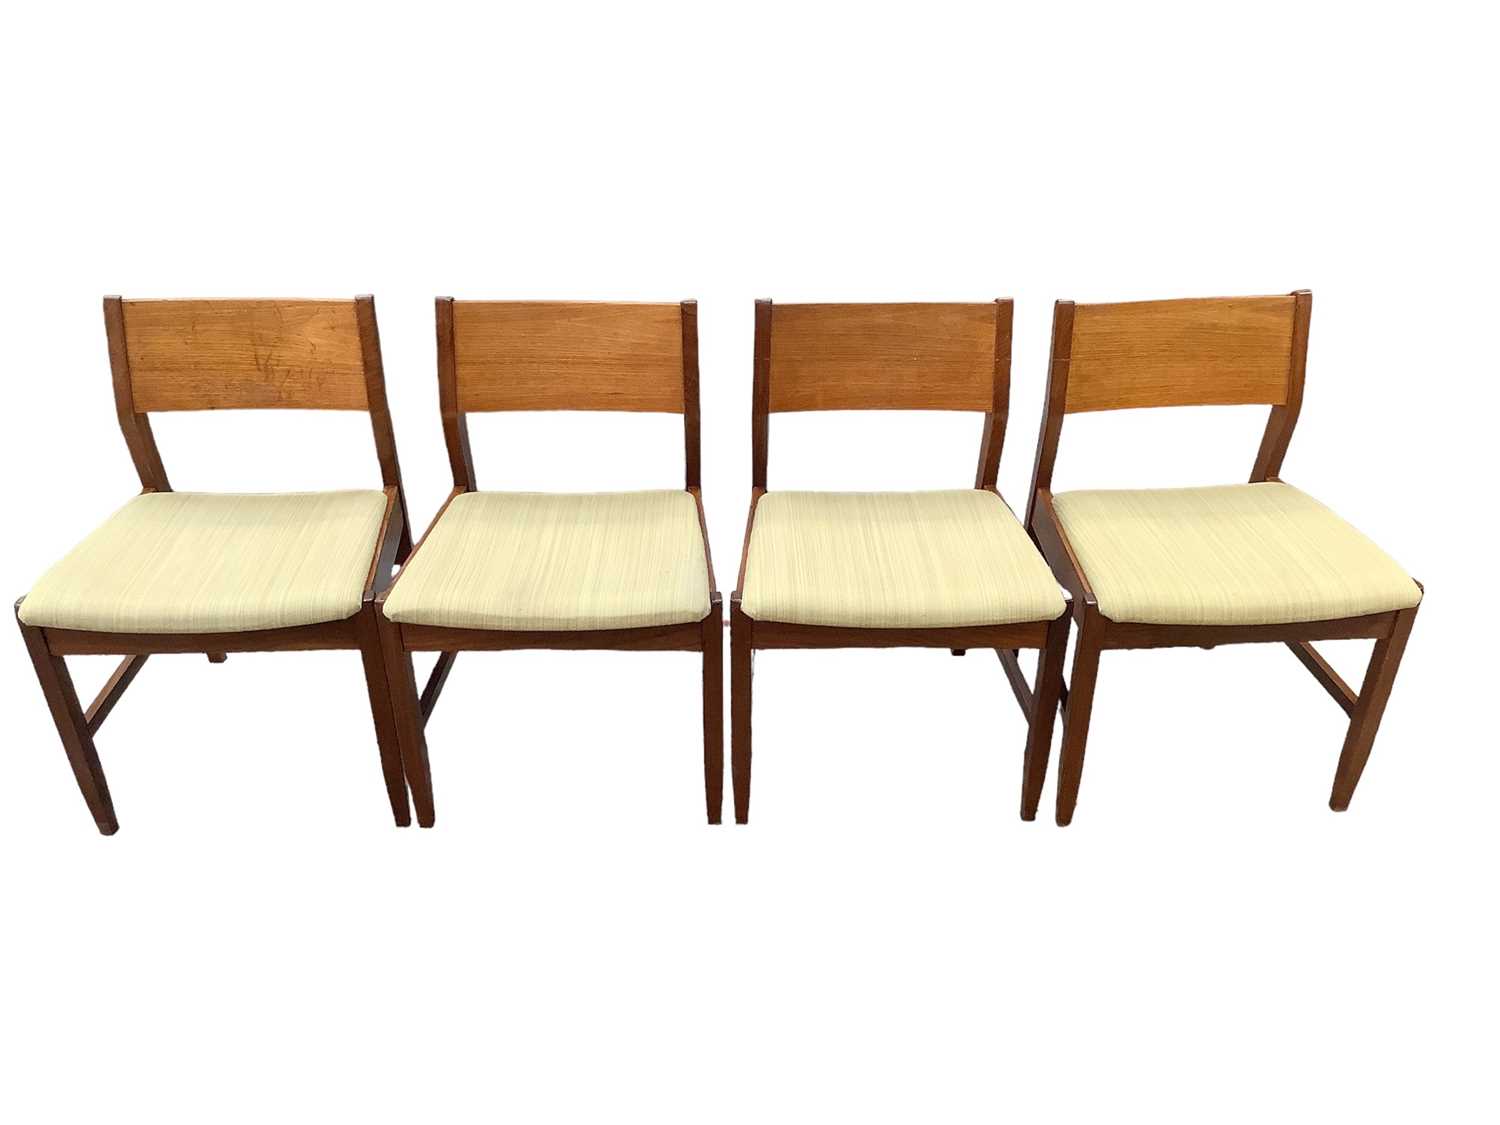 1960s teak table and set of four chairs by Windsor and Newton - Bild 2 aus 10